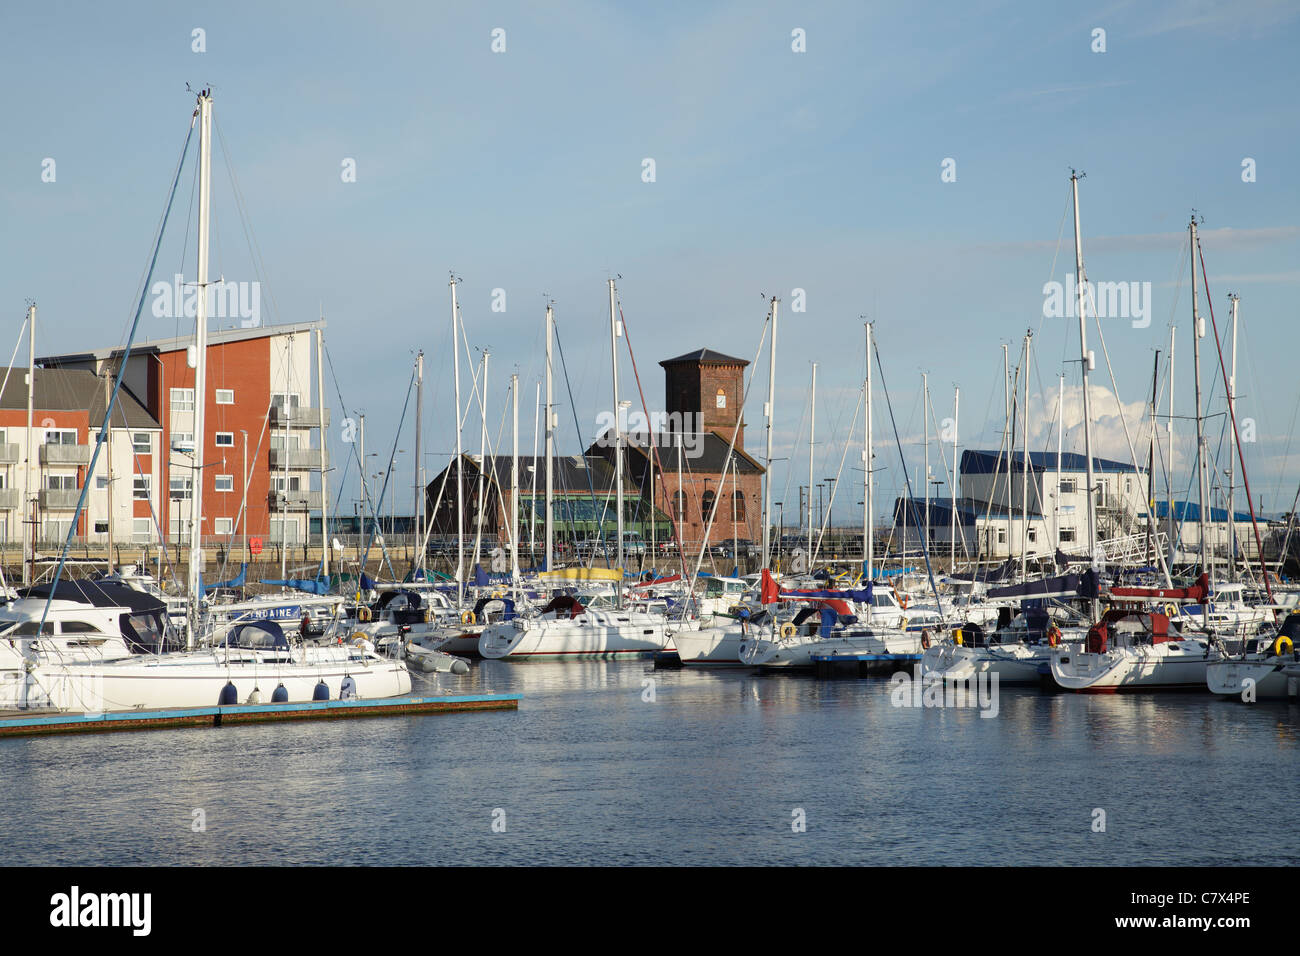 The Marina at Ardrossan Harbour on the River Clyde in Ayrshire Scotland UK Stock Photo